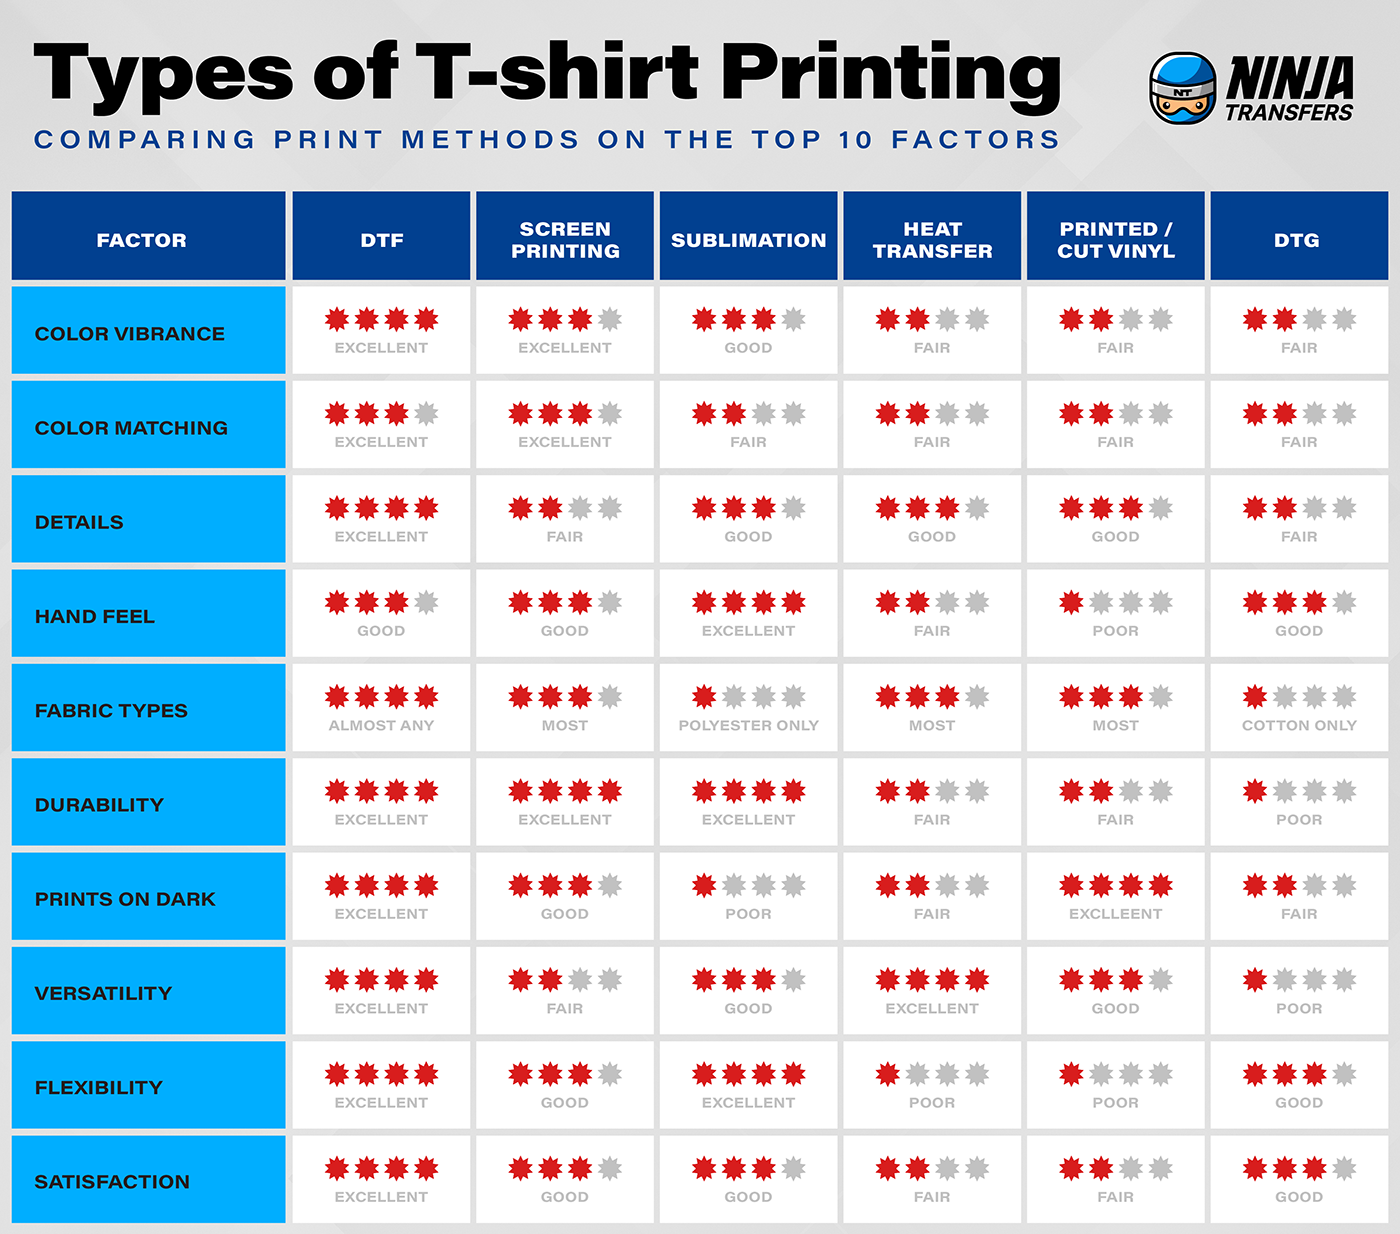 Types of T-shirt printing comparison chart